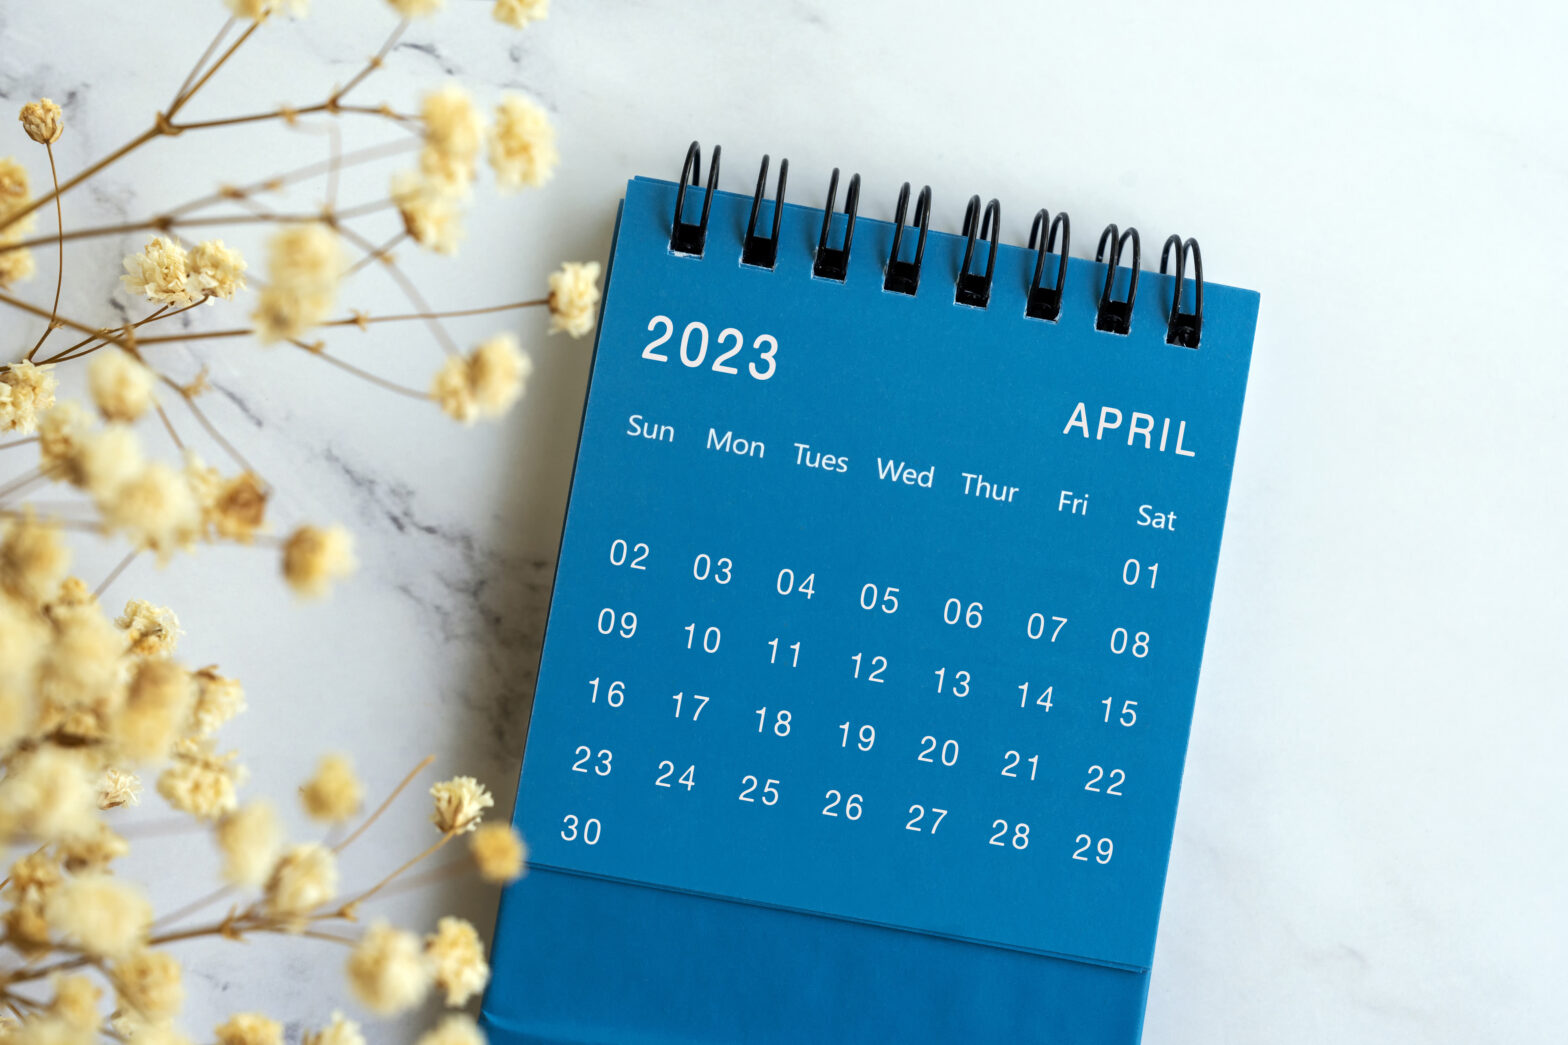 A decorative calendar in Goodwill blue showing the month of April 2023.